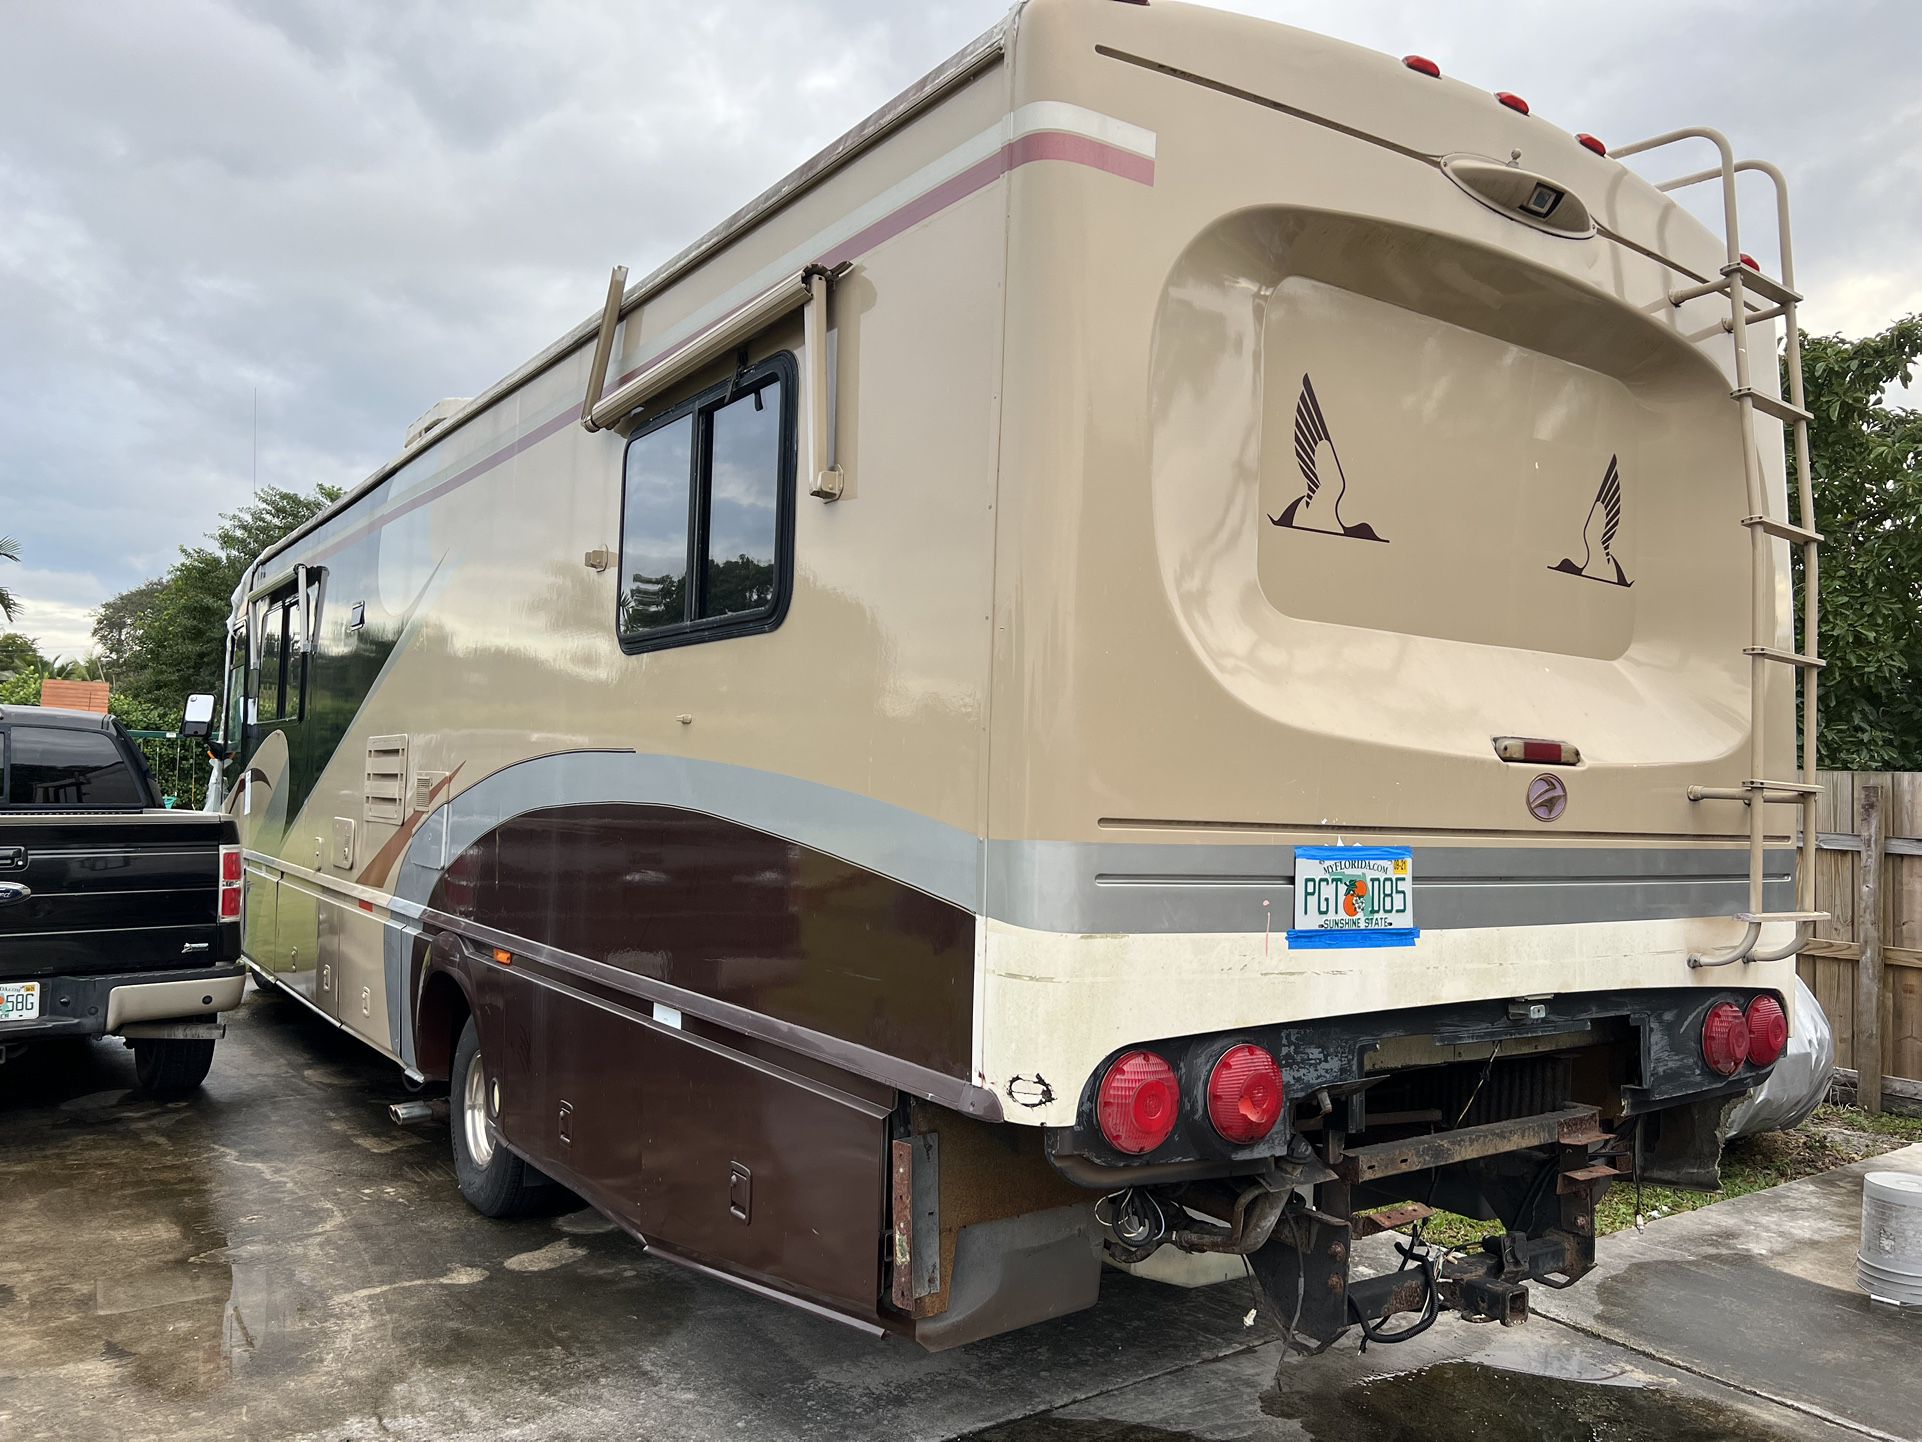 Ford P30 1997 Motor home RV, Salvage Title 